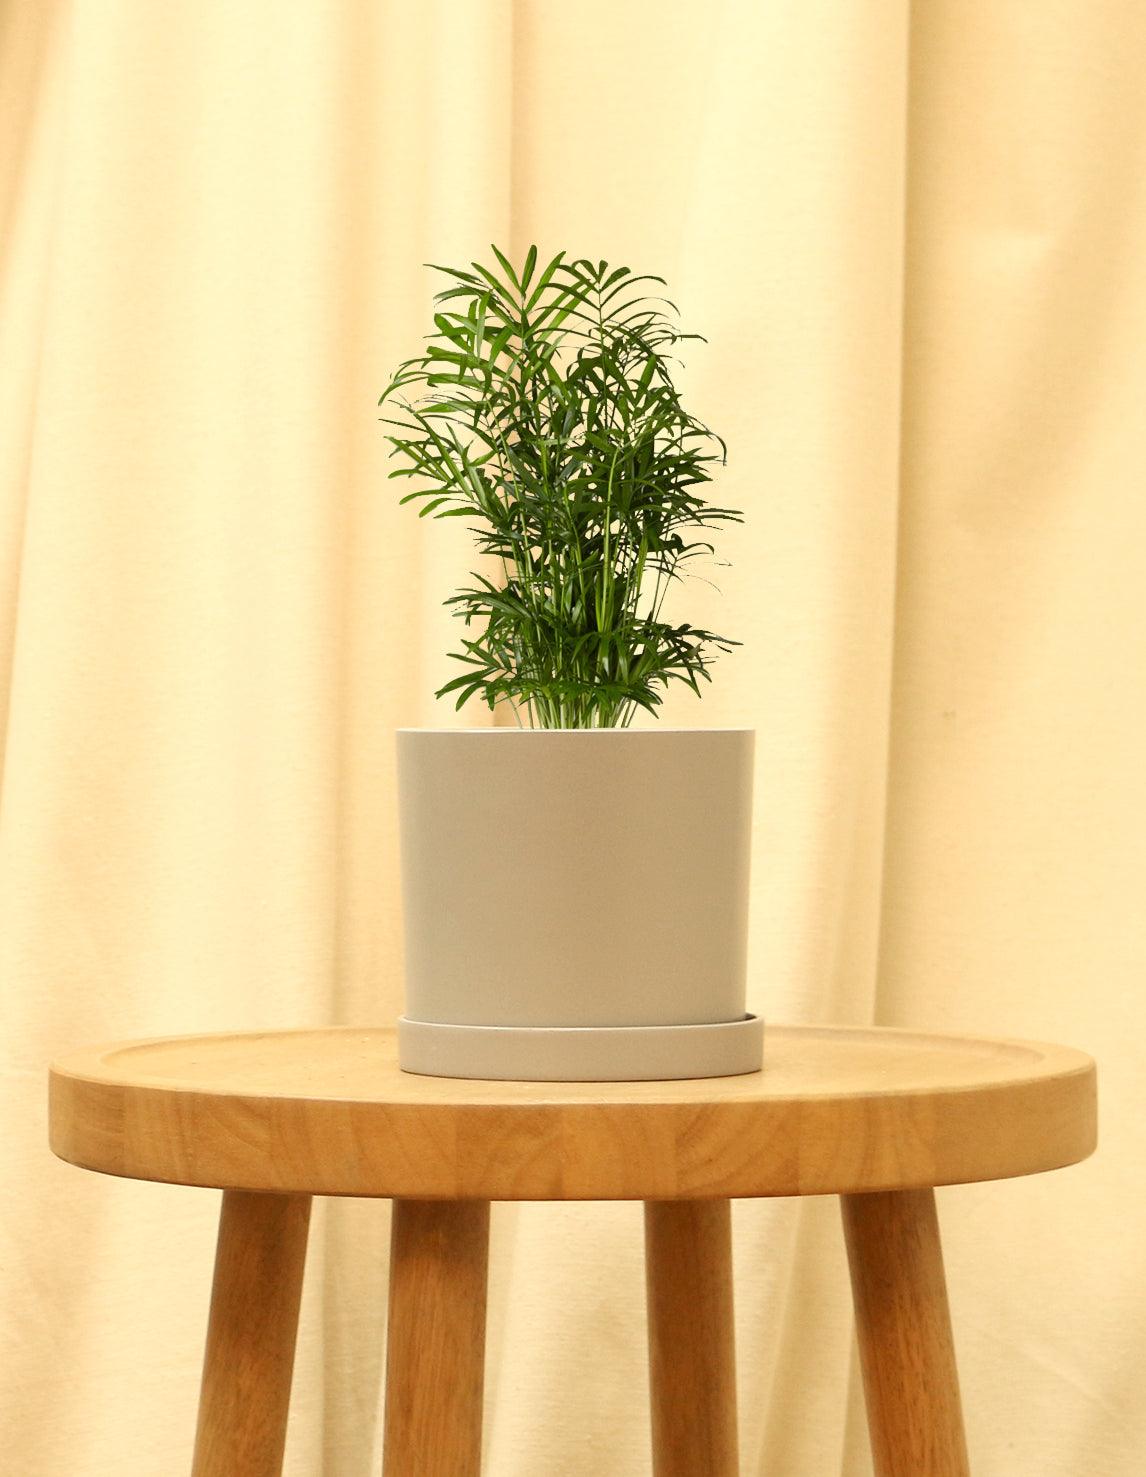 Small Parlor Palm in grey pot.